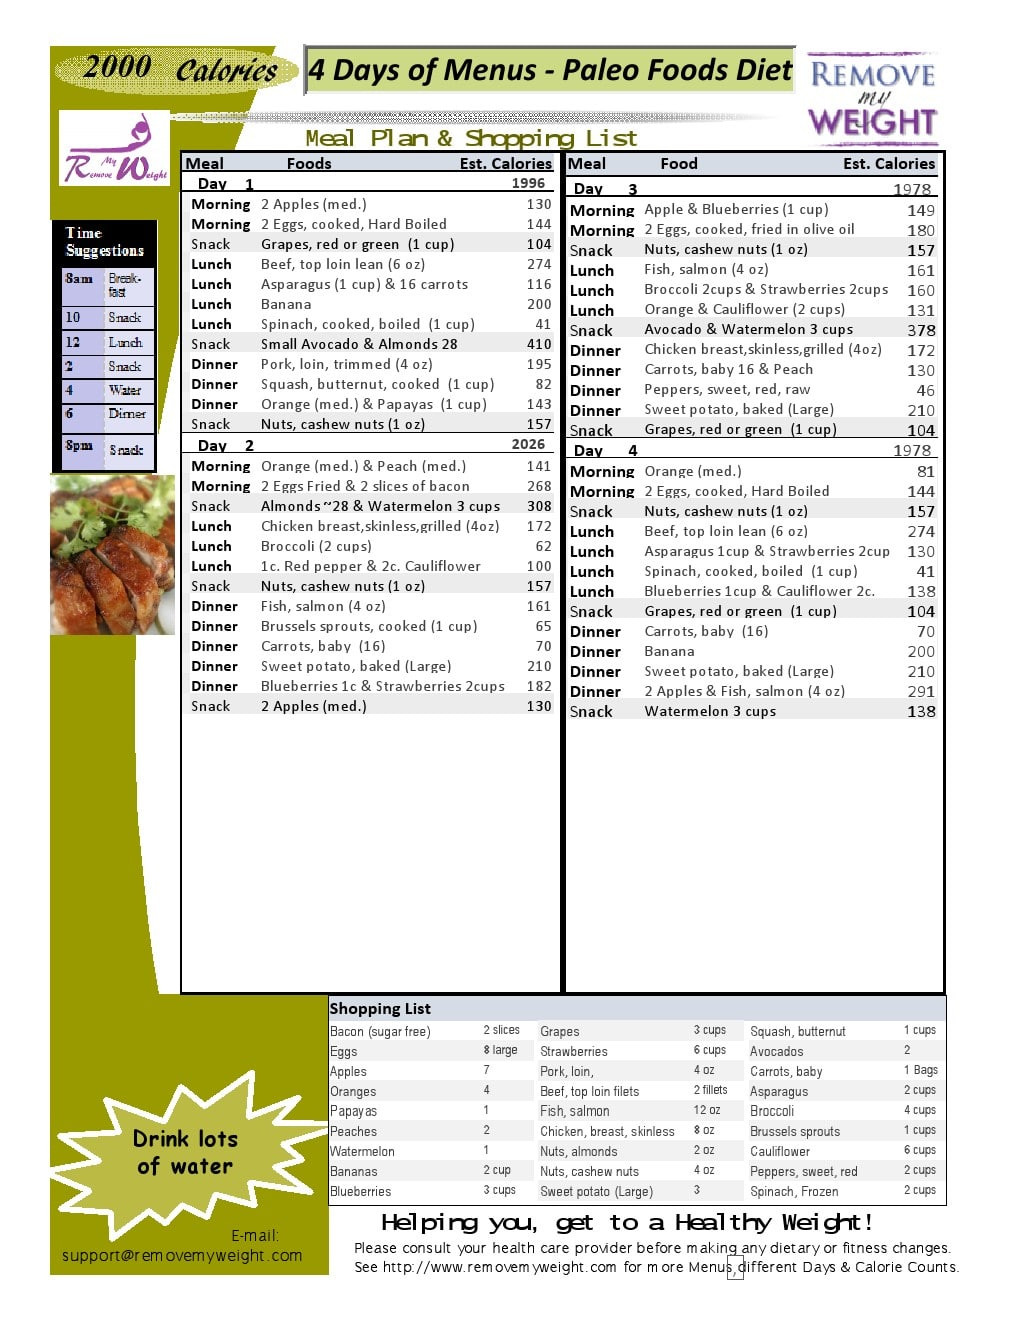 Paleo Diet Menu Plan
 Free 2000 Calories a day 4 Day Paleo Diet with Shoppong